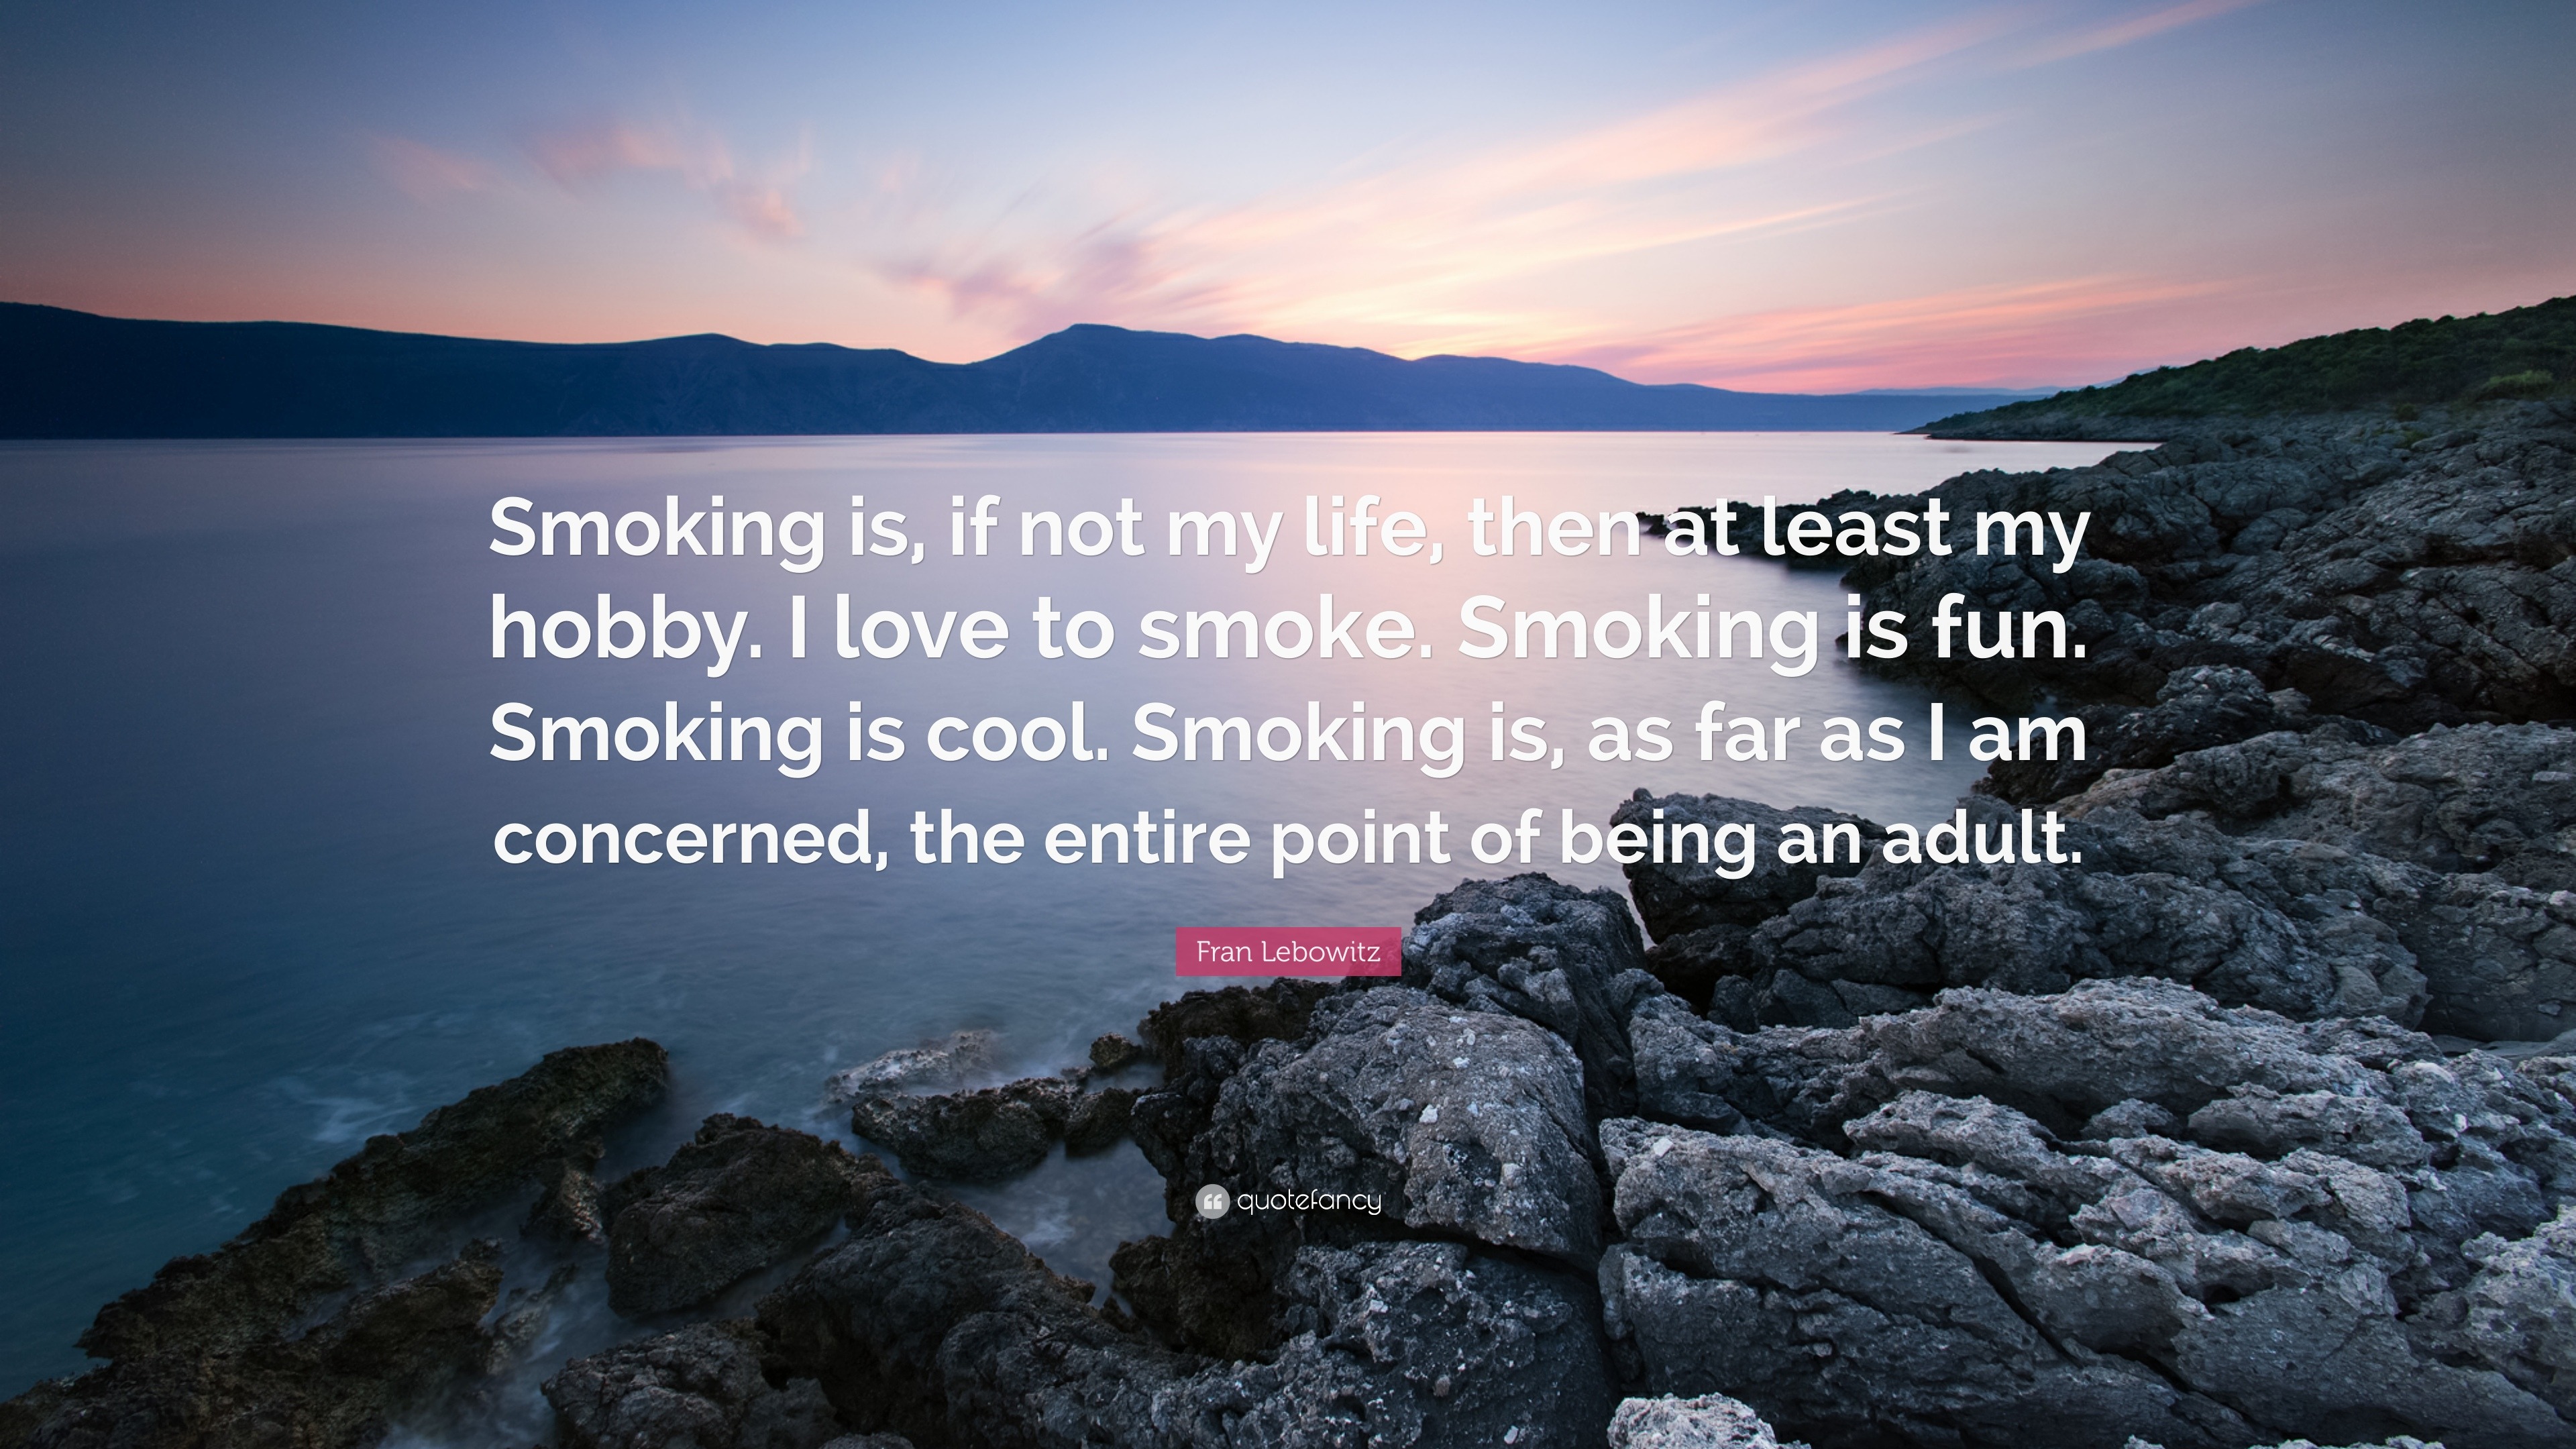 Fran Lebowitz Quote Smoking Is If Not My Life Then At Least My Hobby I Love To Smoke Smoking Is Fun Smoking Is Cool Smoking Is As Far